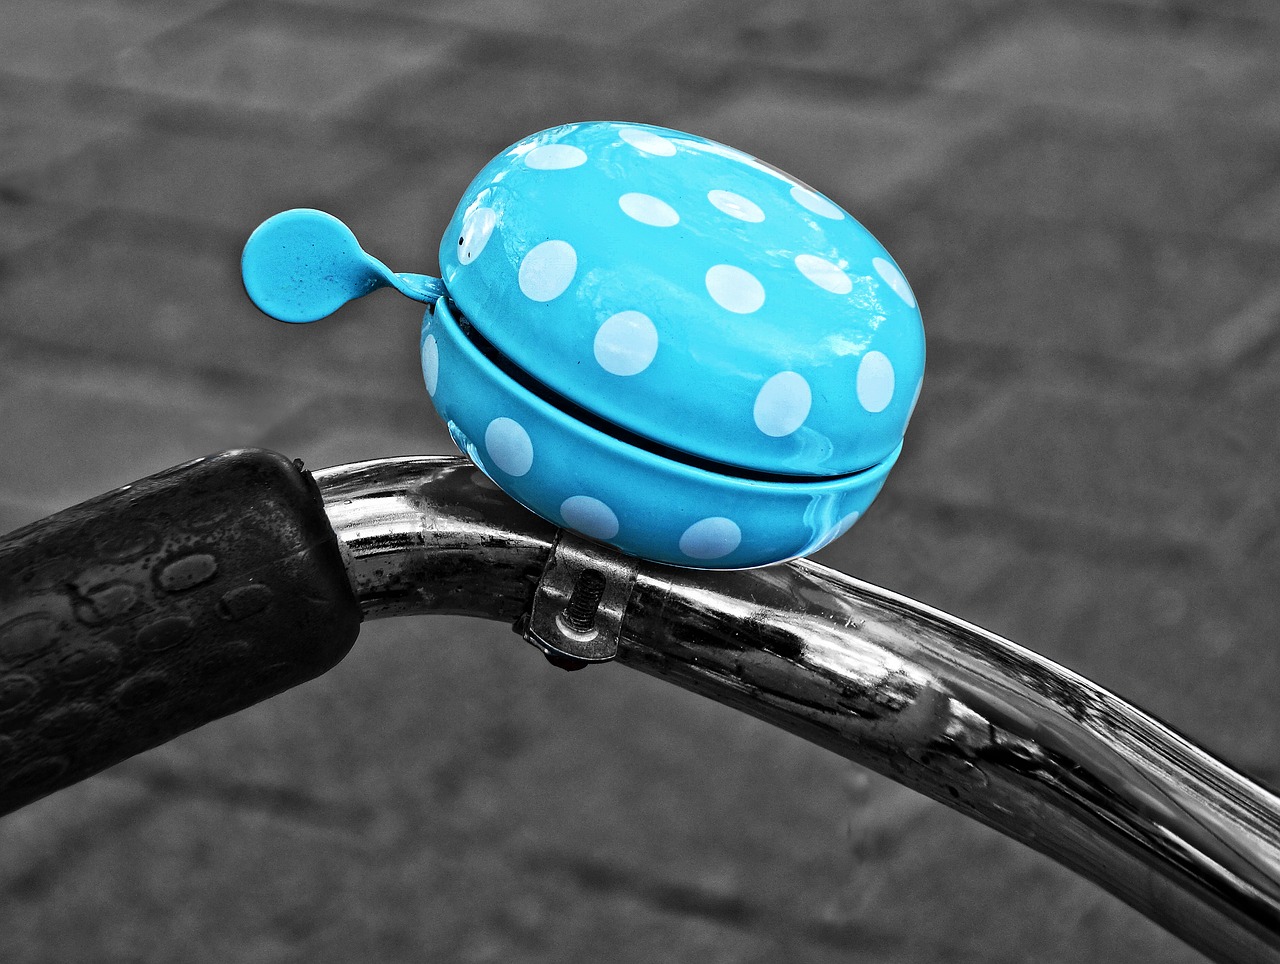 bell bicycle bell bicycle free photo